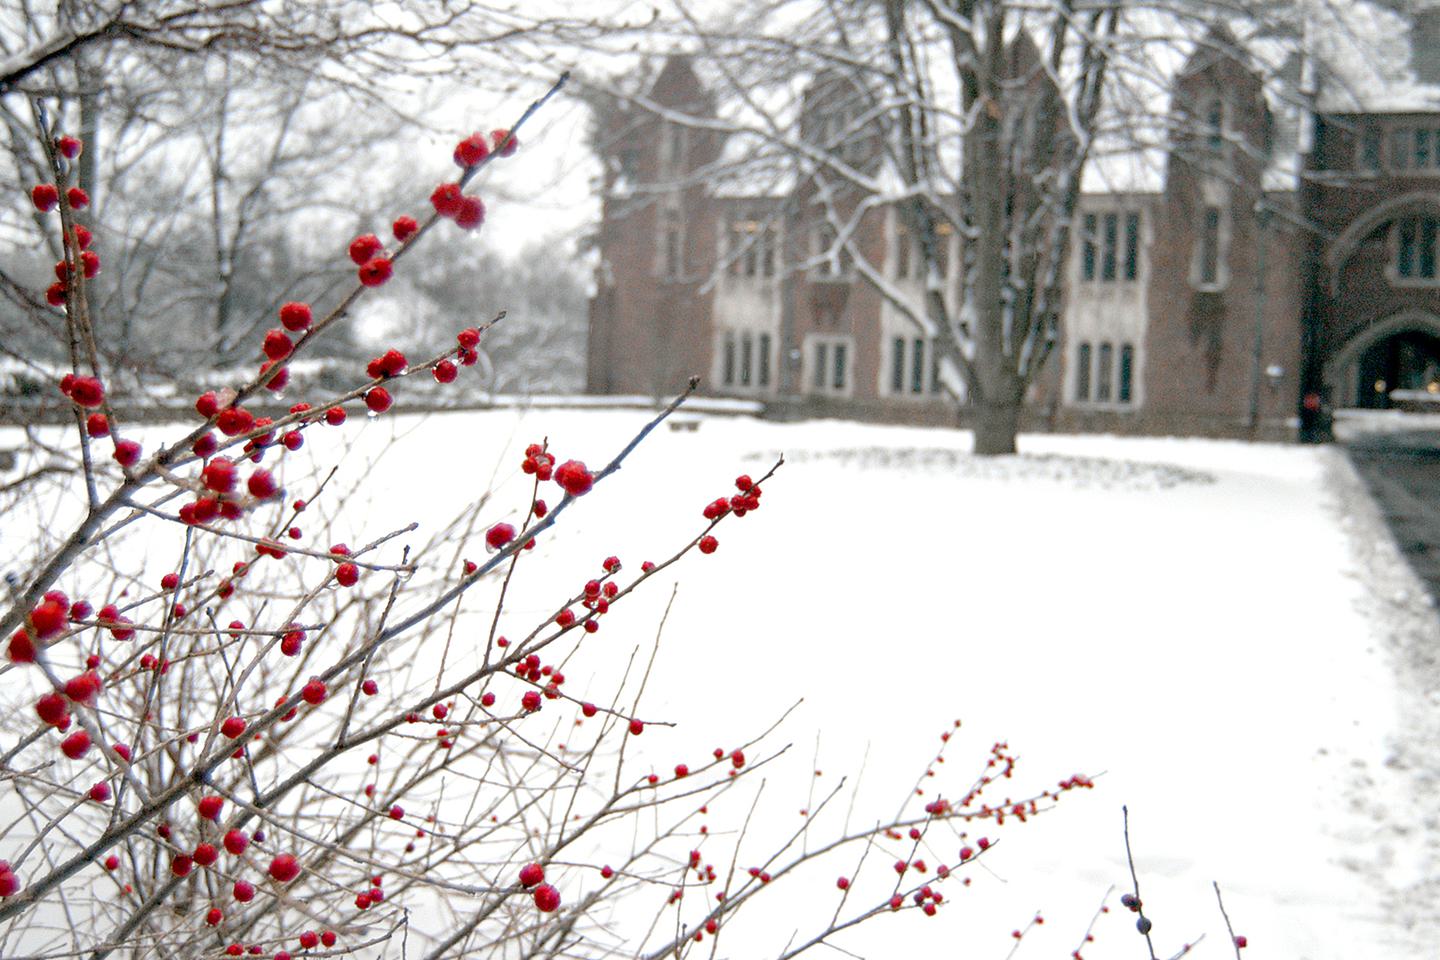 A winter photo of campus with winter berries in the foreground.